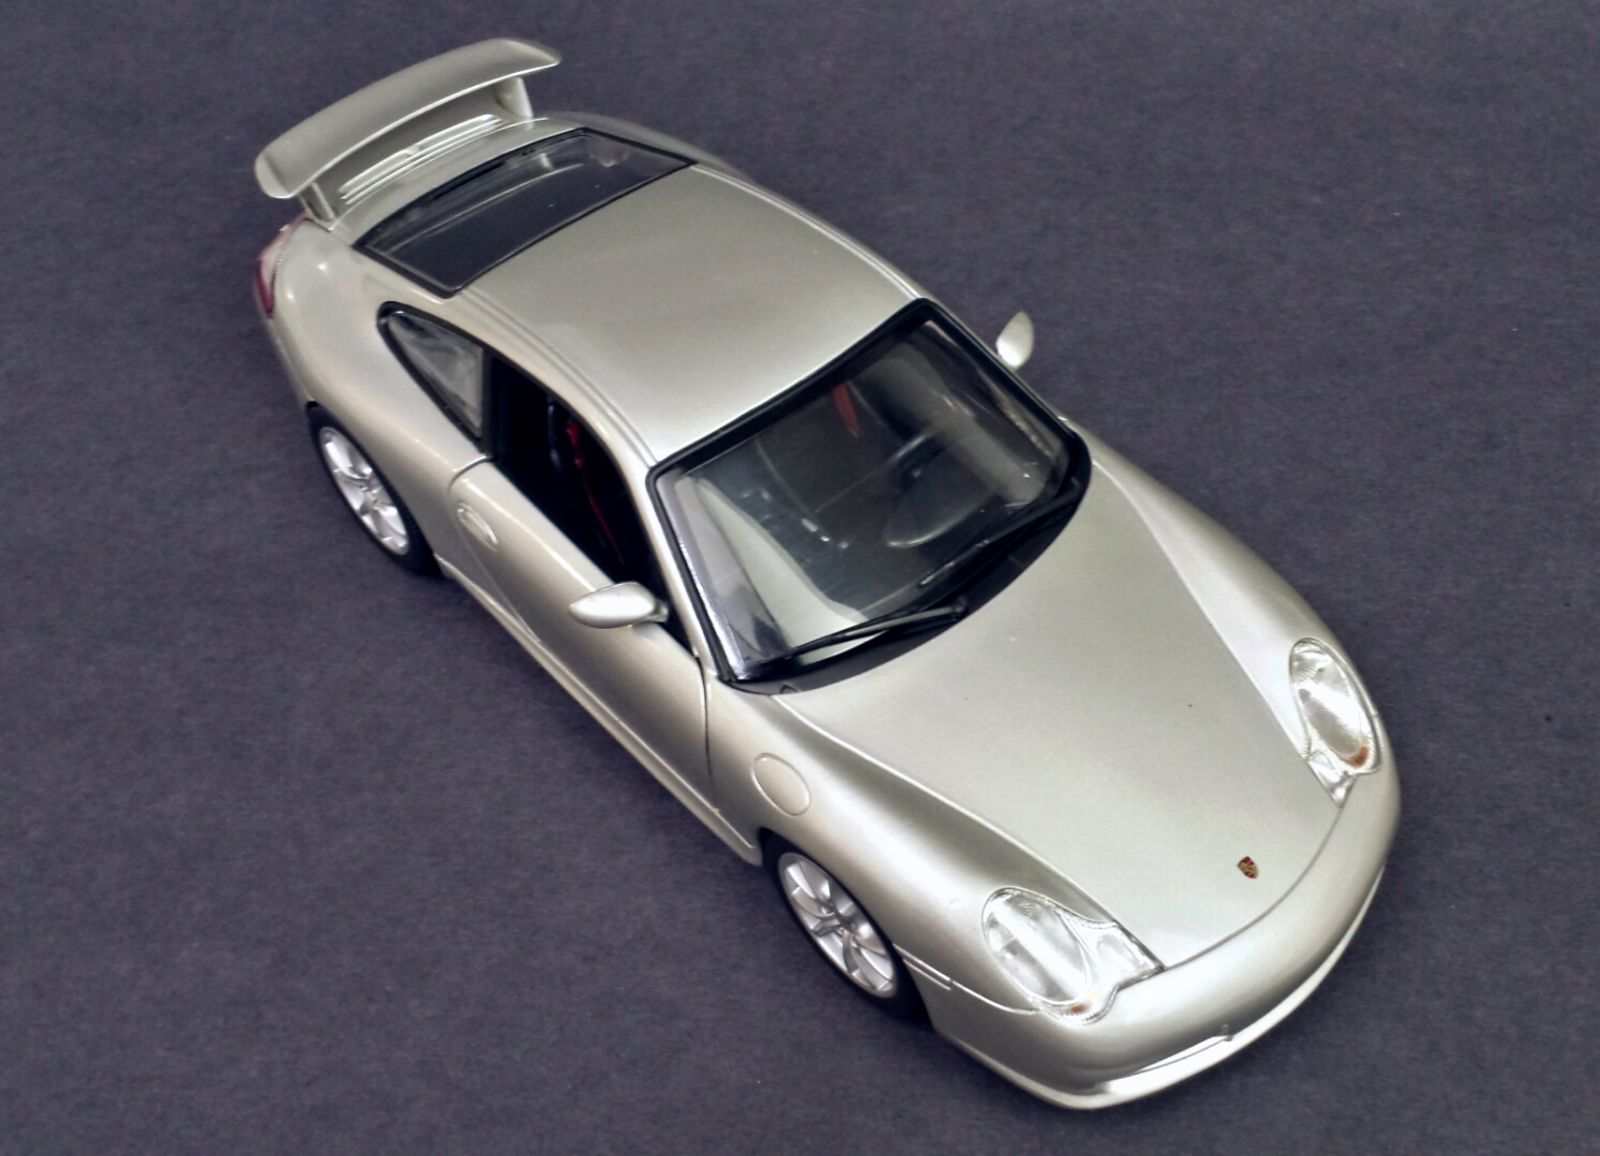 Illustration for article titled Teutonic Tuesday: Porsche 996 GT3